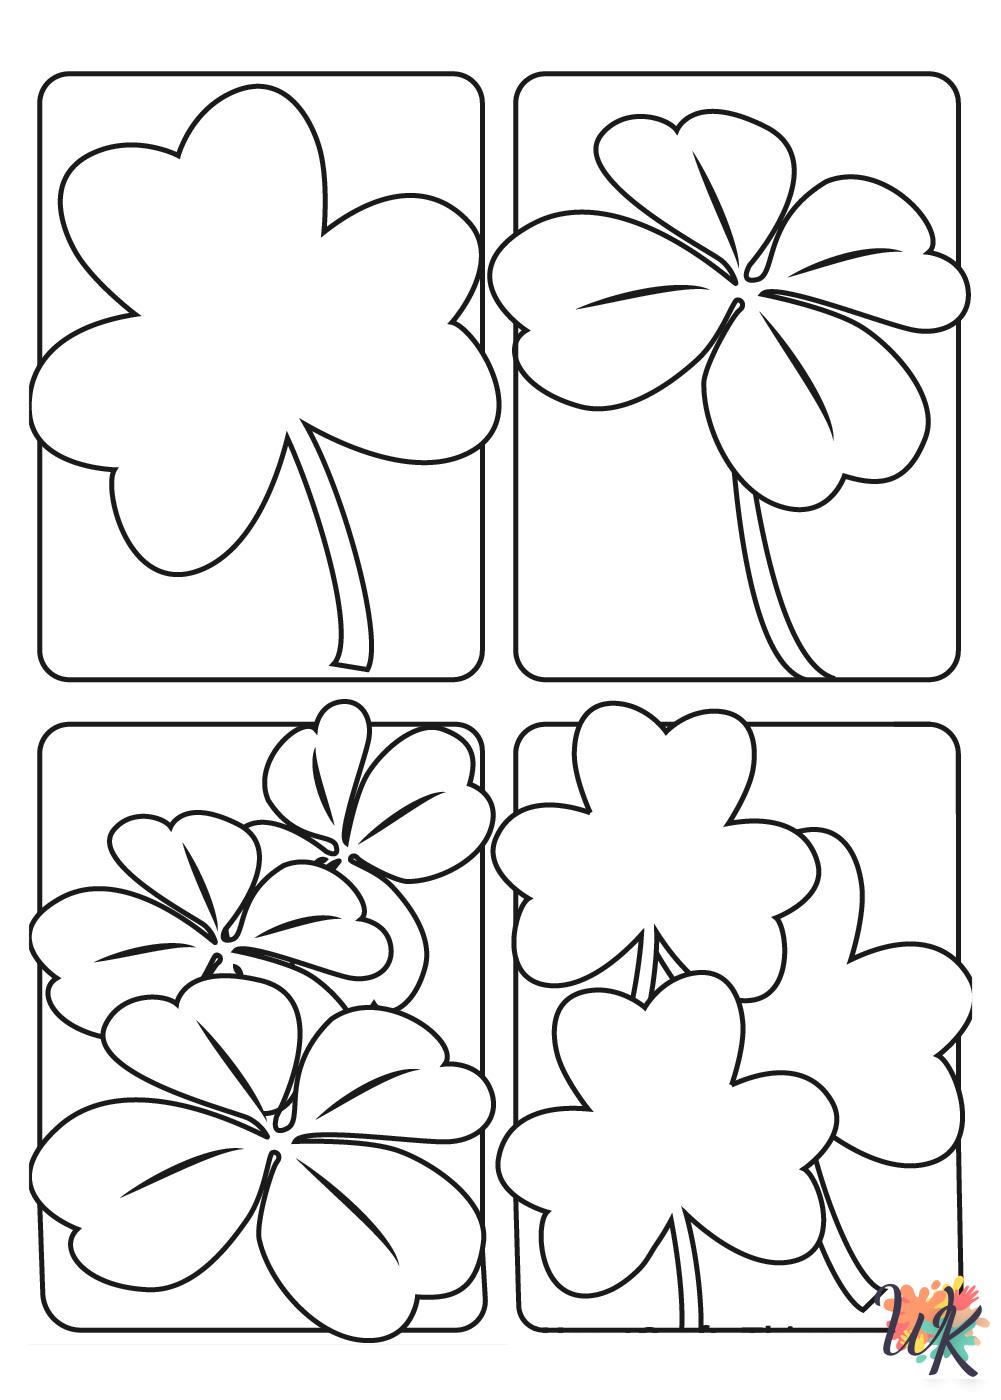 merry Shamrock coloring pages